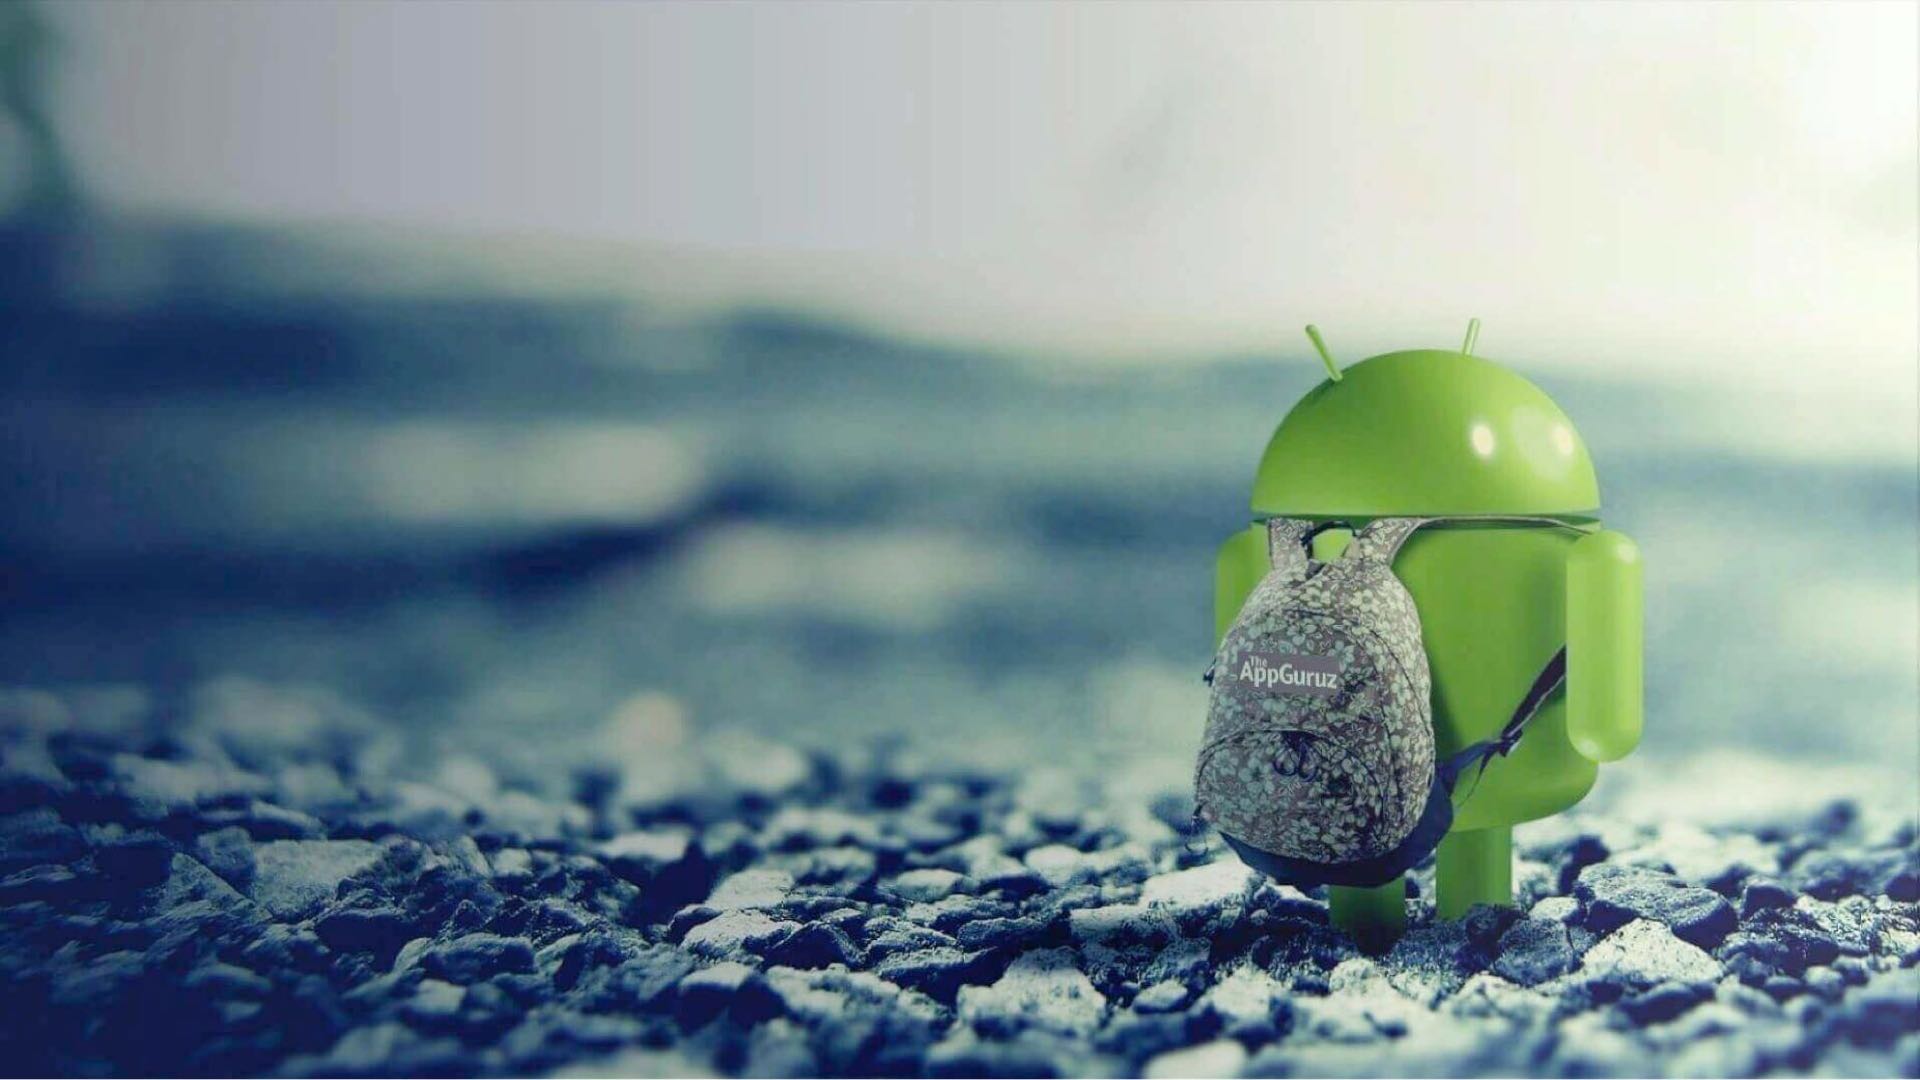 Android App Development Company - Hire Android Developer